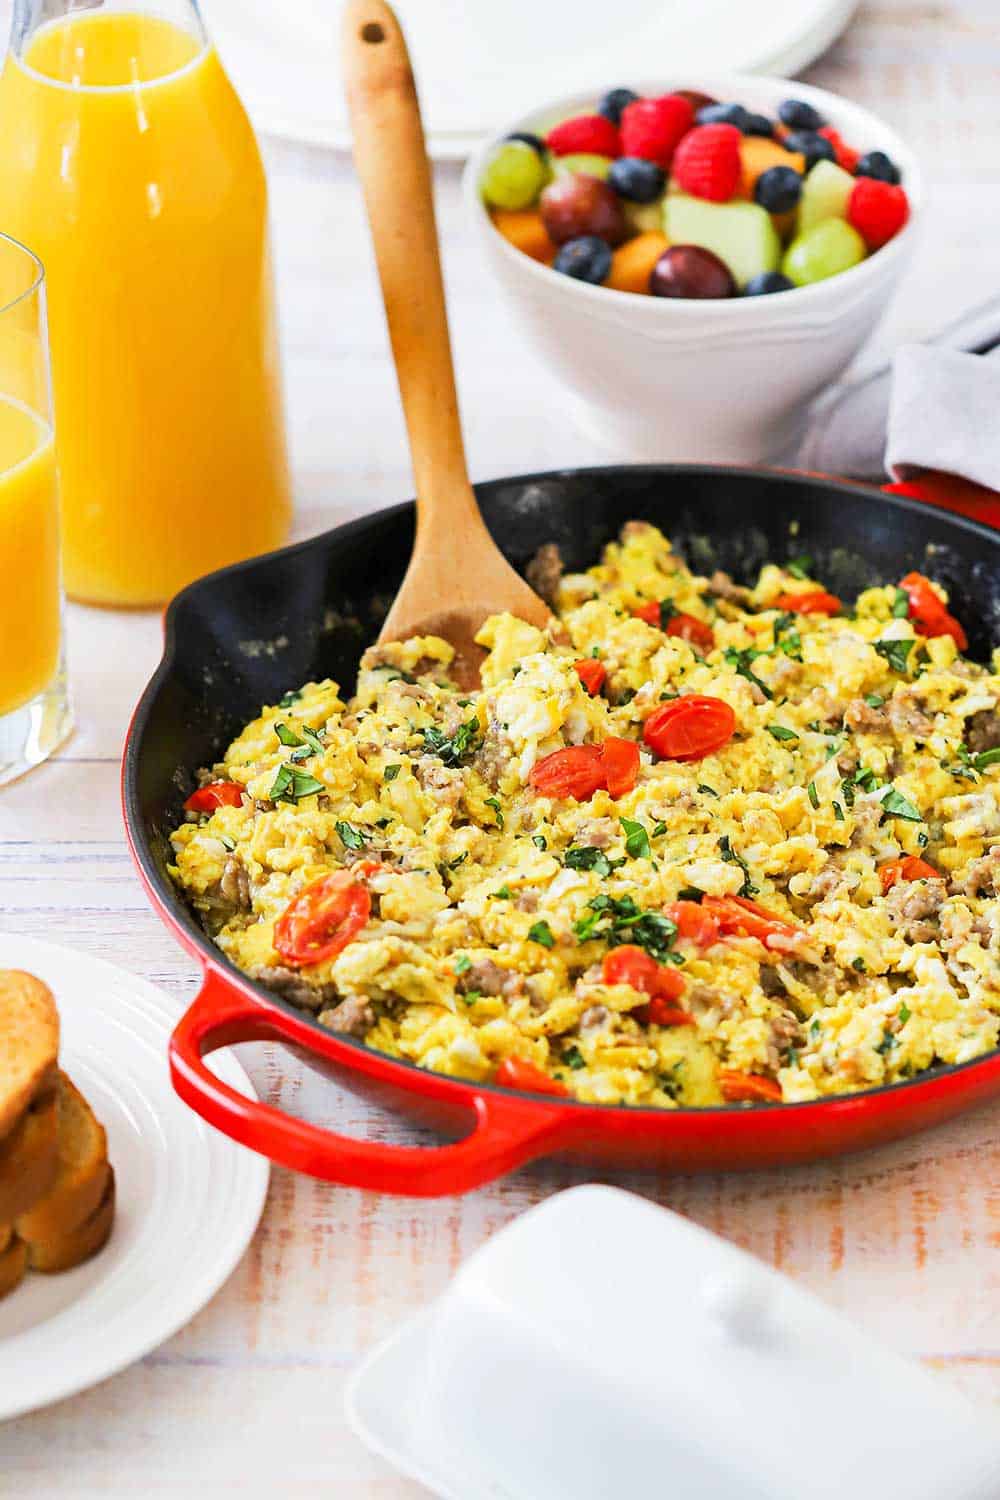 A large red skillet filled with an Italian skillet scramble next to a white bowl filled with fresh fruit.